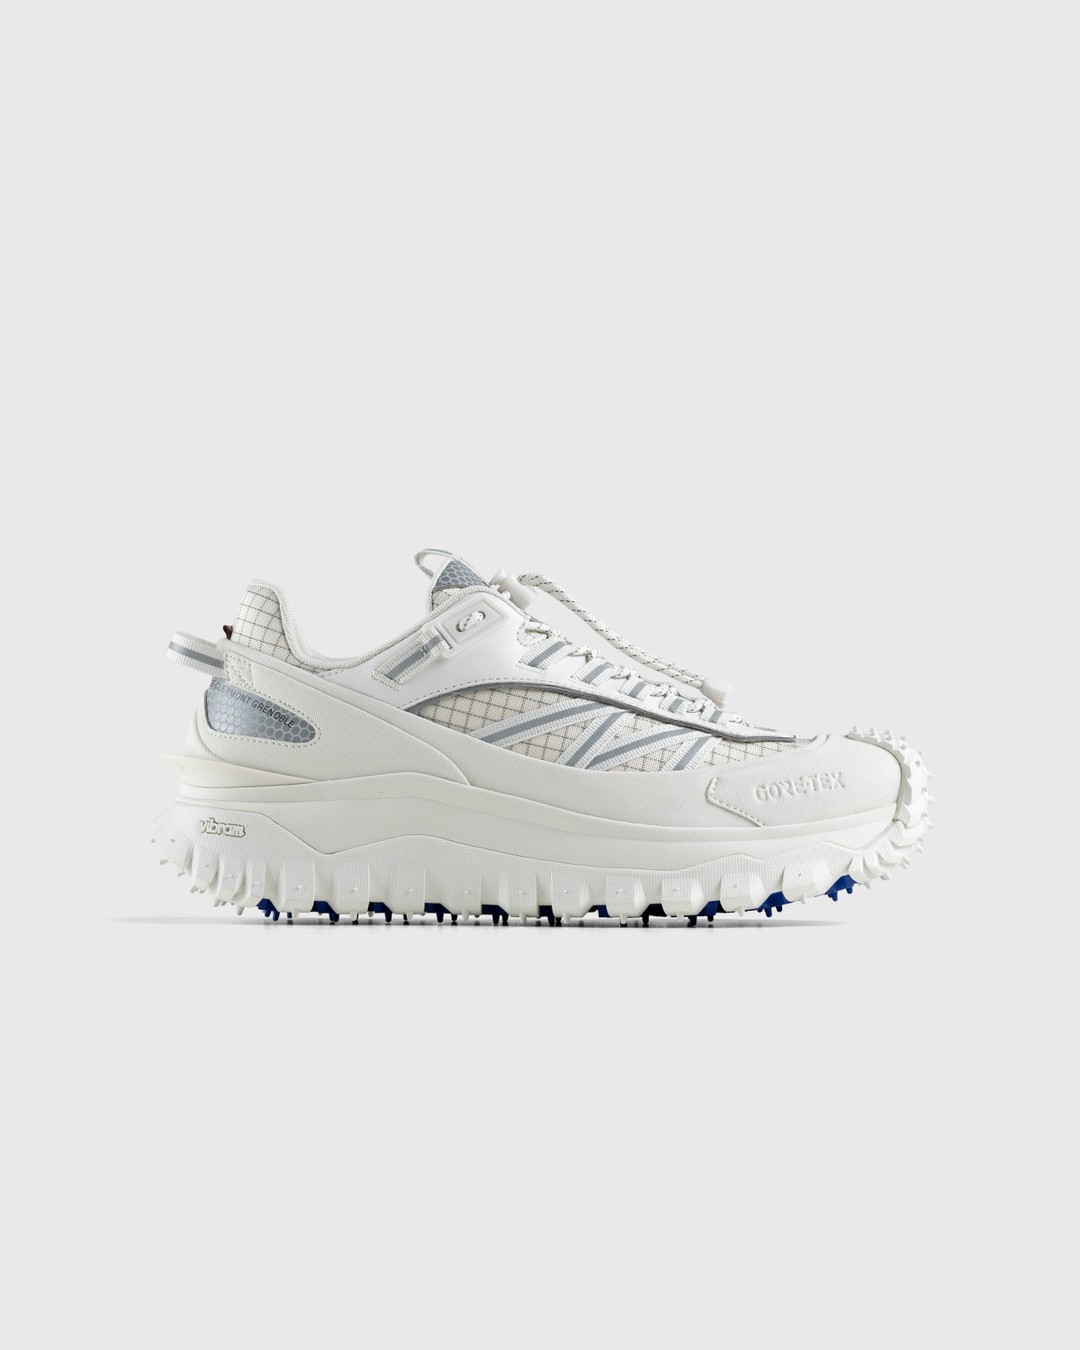 Moncler – Trailgrip GTX Sneakers Off White - Low Top Sneakers - White - Image 1